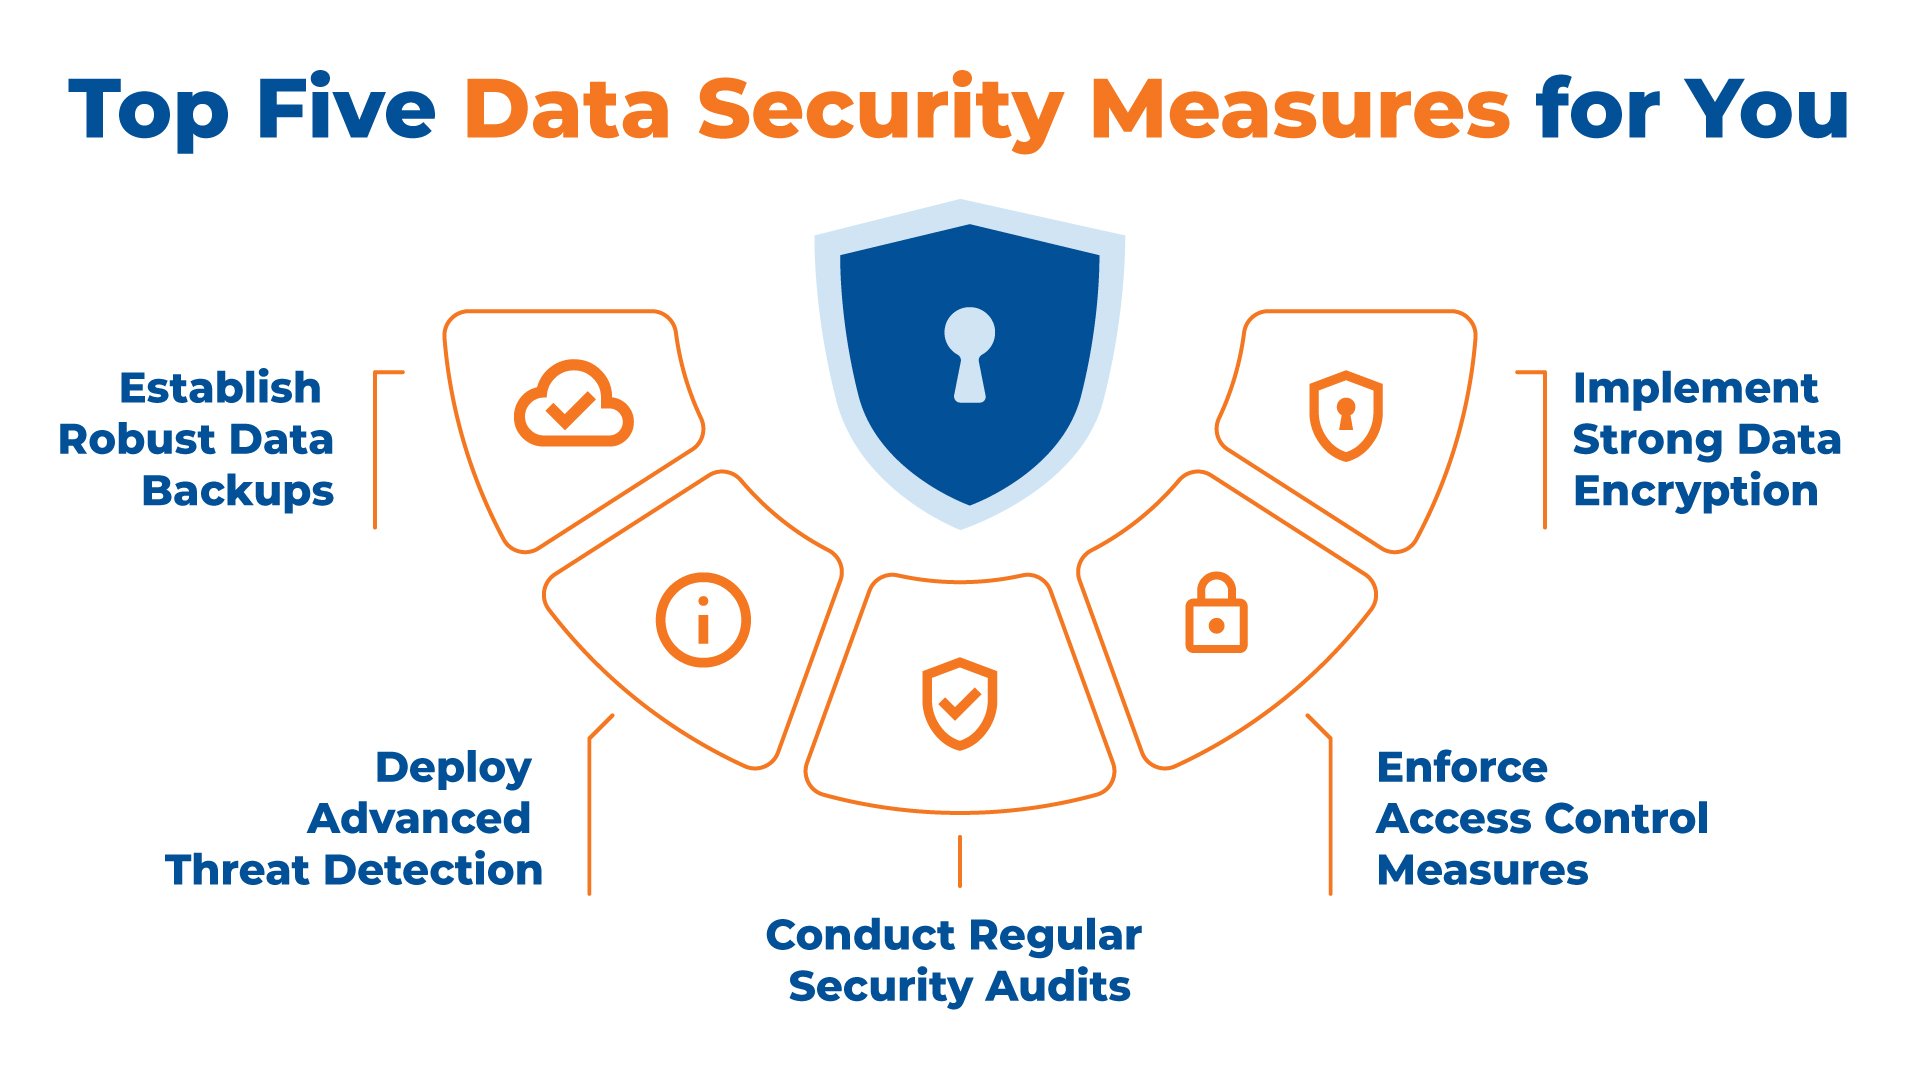 Top Five Data Security Measures for You
